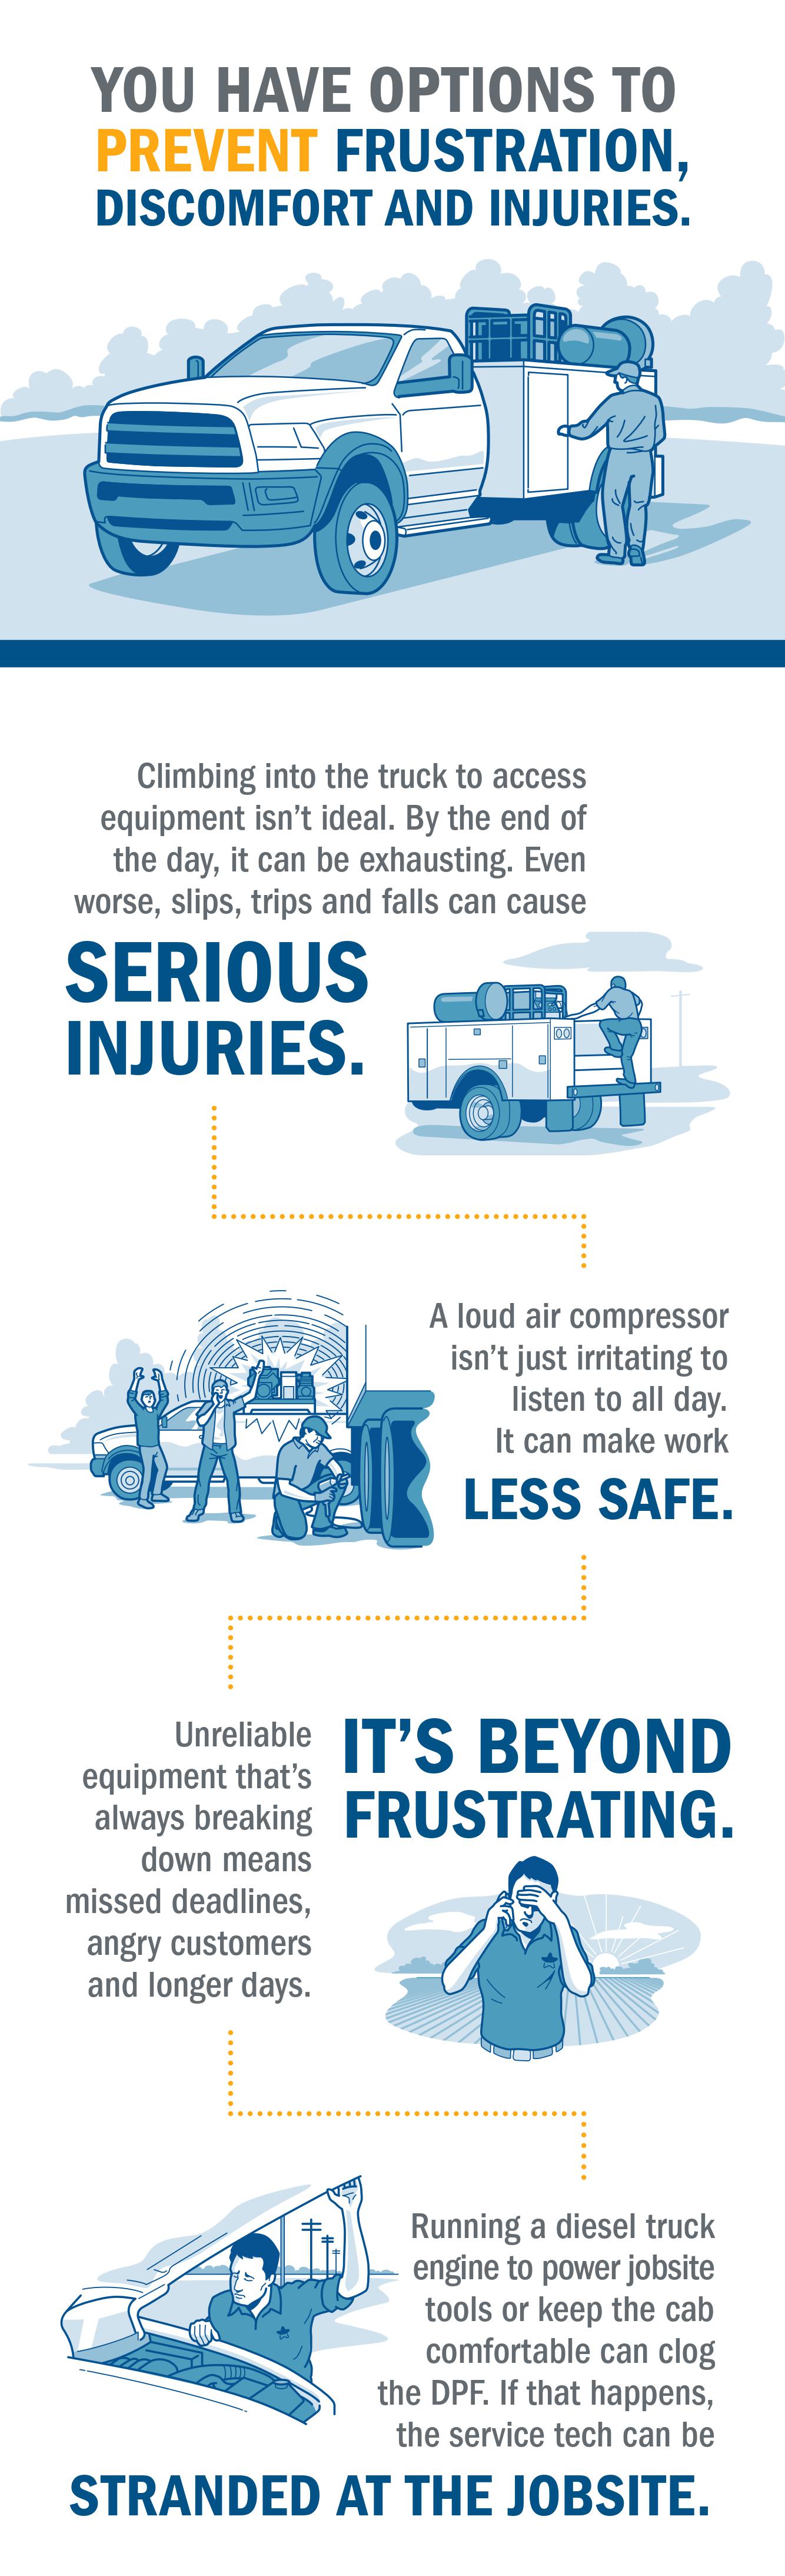 Infographic depicting service technician challenges like noise, safety, and injuries